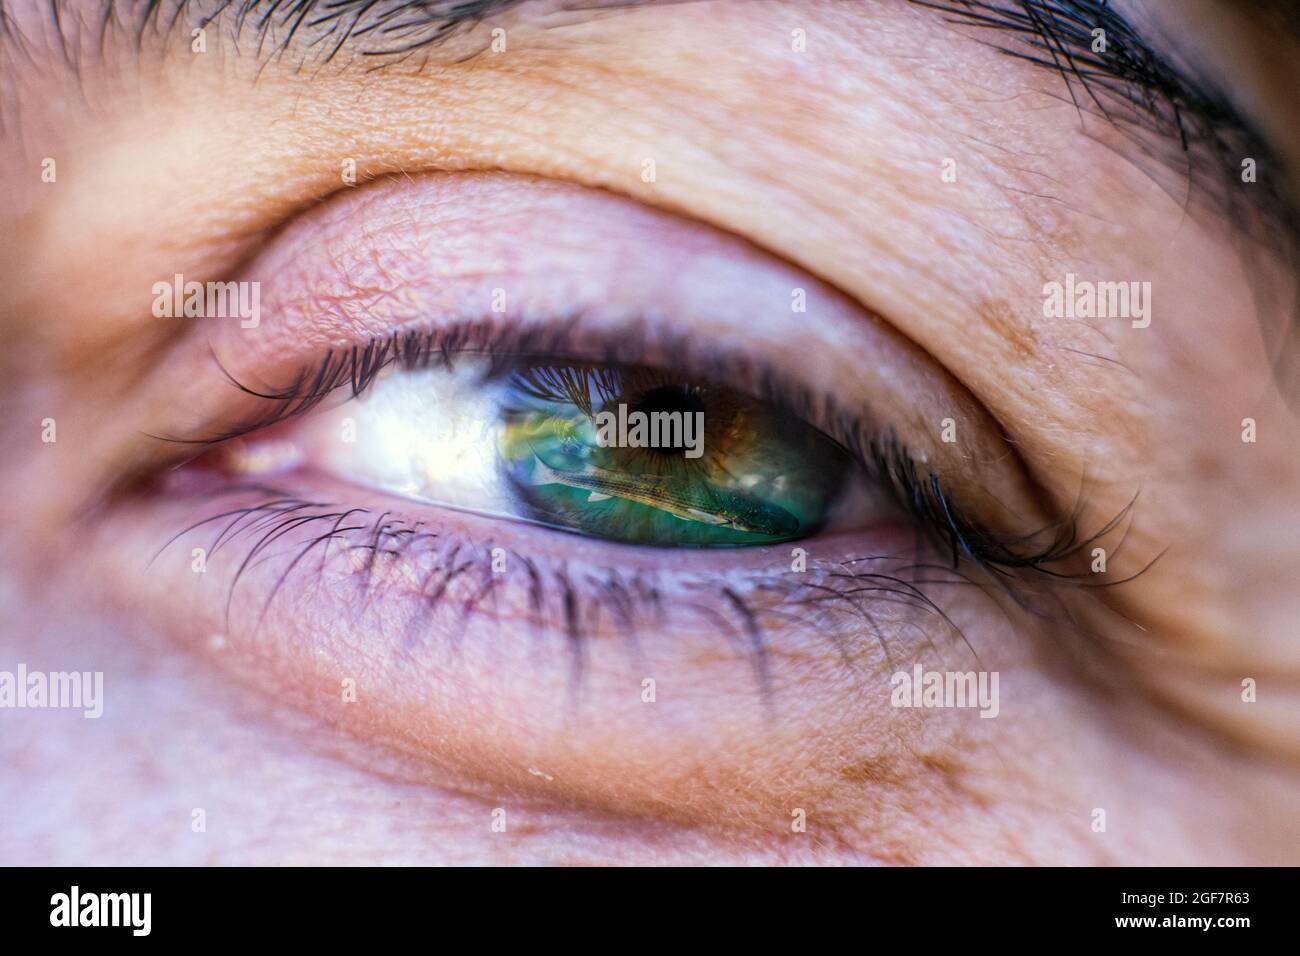 Nature in your eye: A mullet fish in a woman's eye with central heterochromia. Double exposure image. Stock Photo